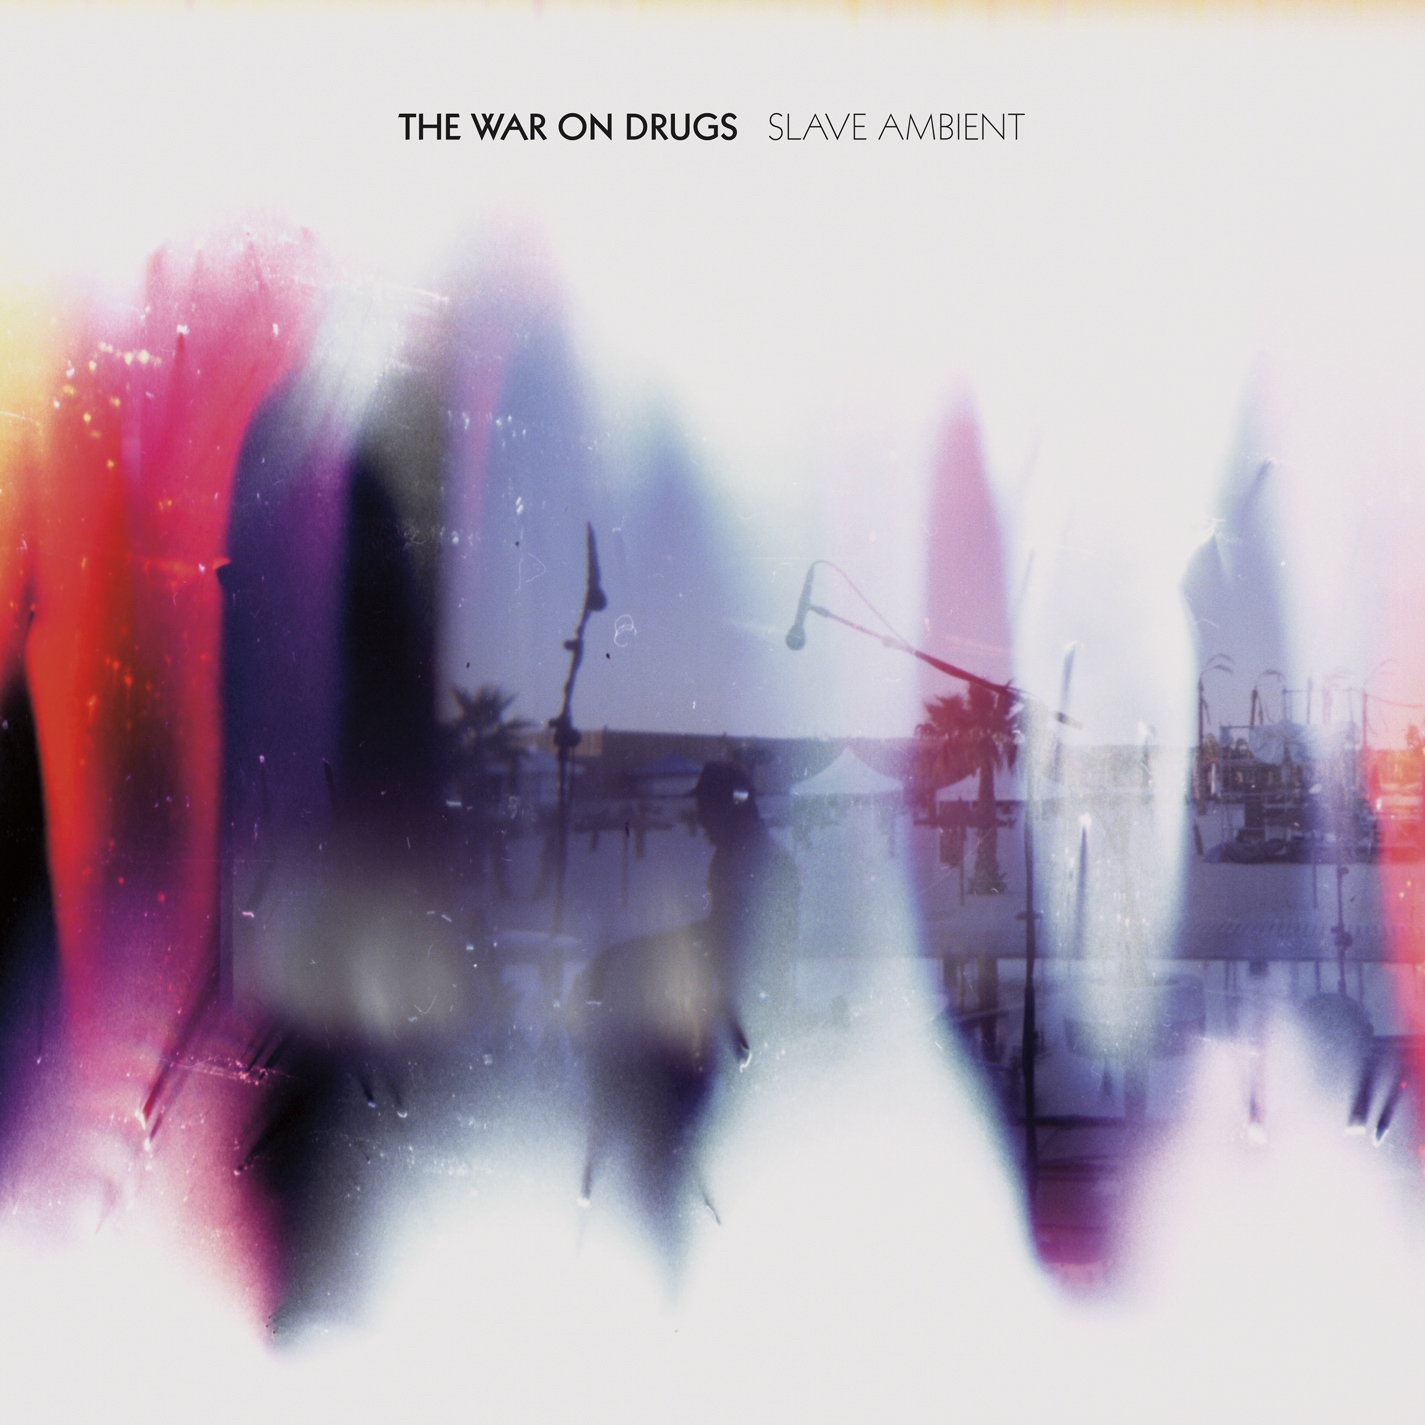 The War On Drugs ... - 00. The War On Drugs - Slave Ambient Deluxe Edition 2011 cover.jpg